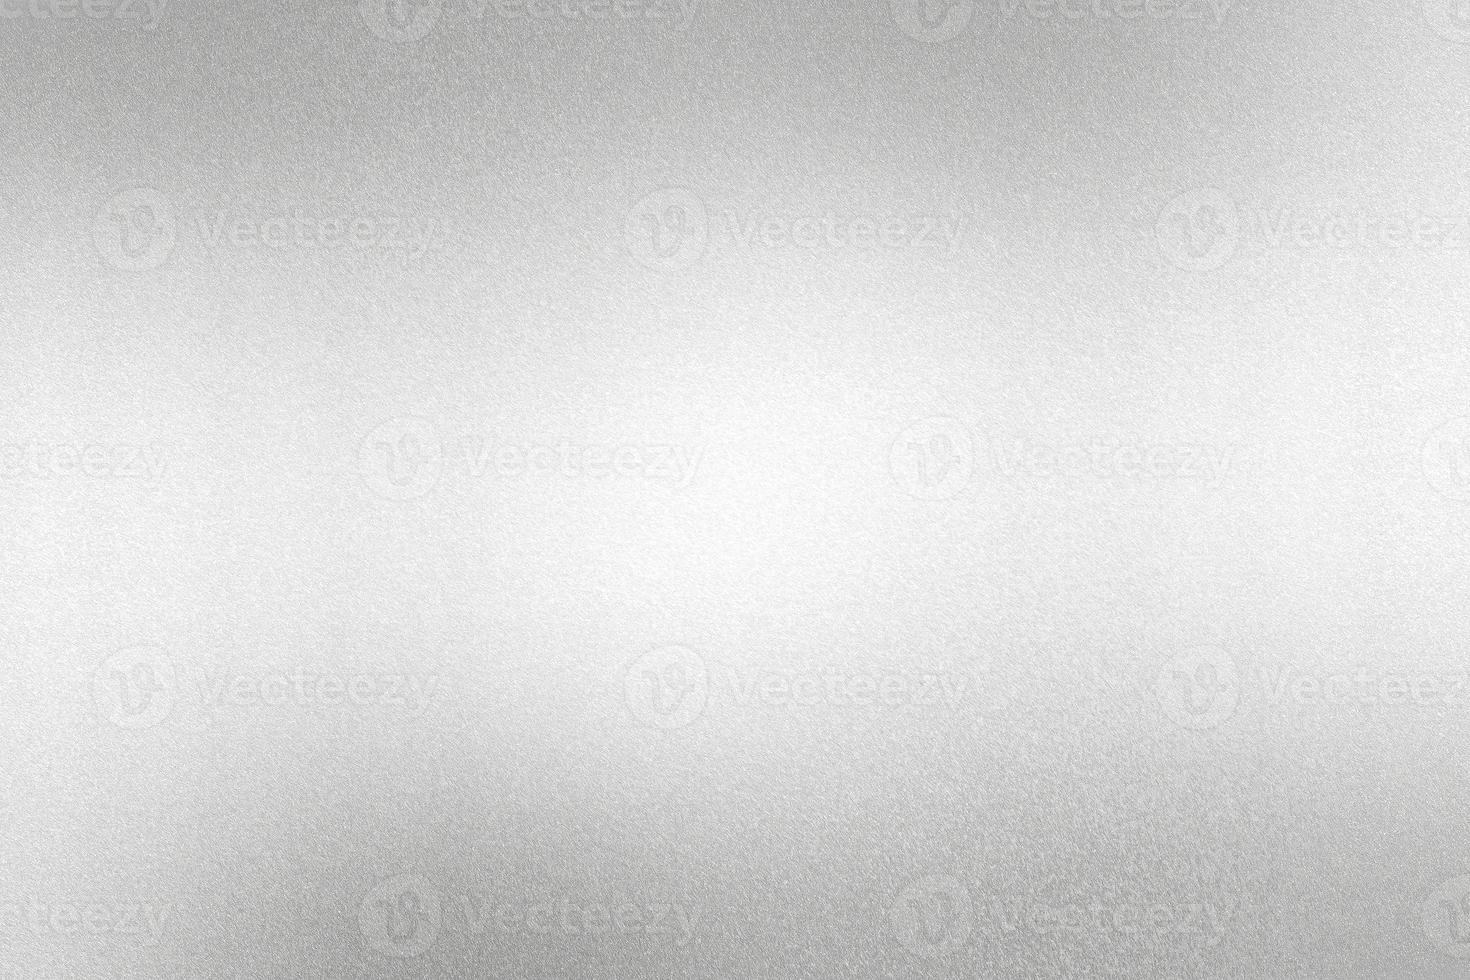 Glowing Silver Foil Glitter Metallic Wall With Copy Space Abstract Texture  Background Stock Photo - Download Image Now - iStock